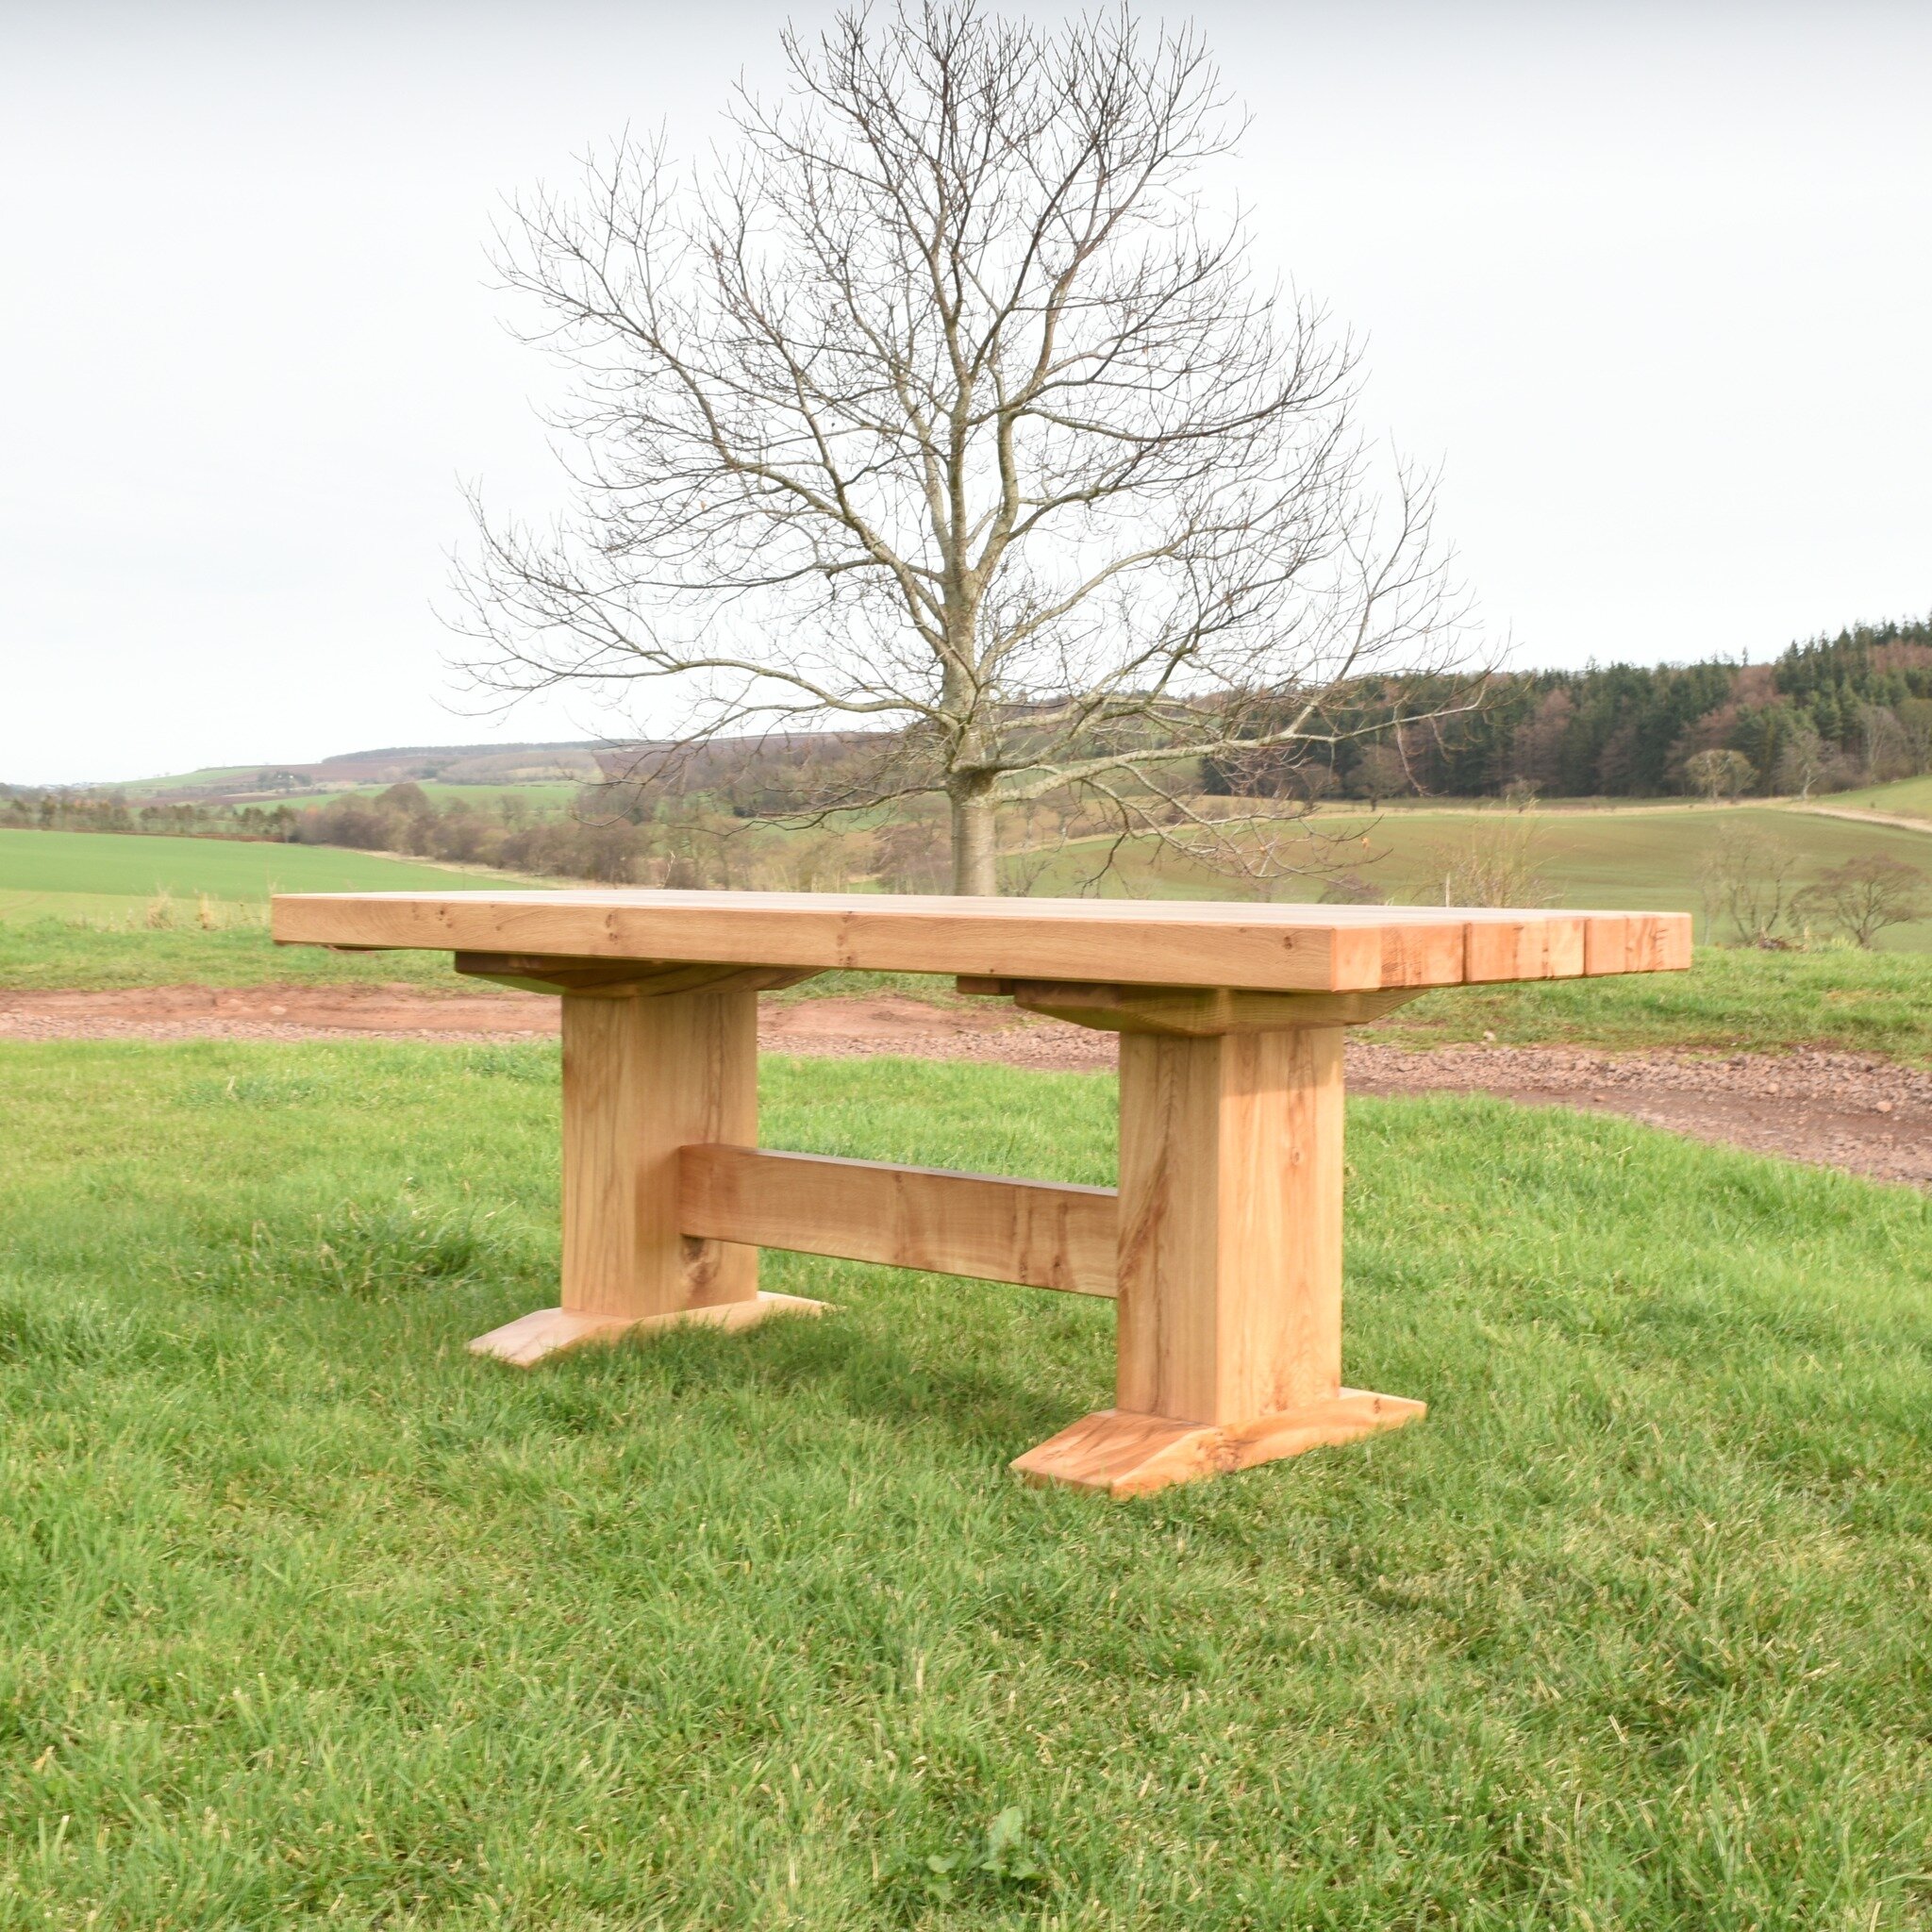 Here are some photos of a huge chunky garden table I finished recently. Very pleased with how it turned out.

#woodworking #furniture #gardenfurniture  #oak #woodworkingporn #woodworkingprojects #finewoodworking #oak #finejoinery #woodworker #furnitu